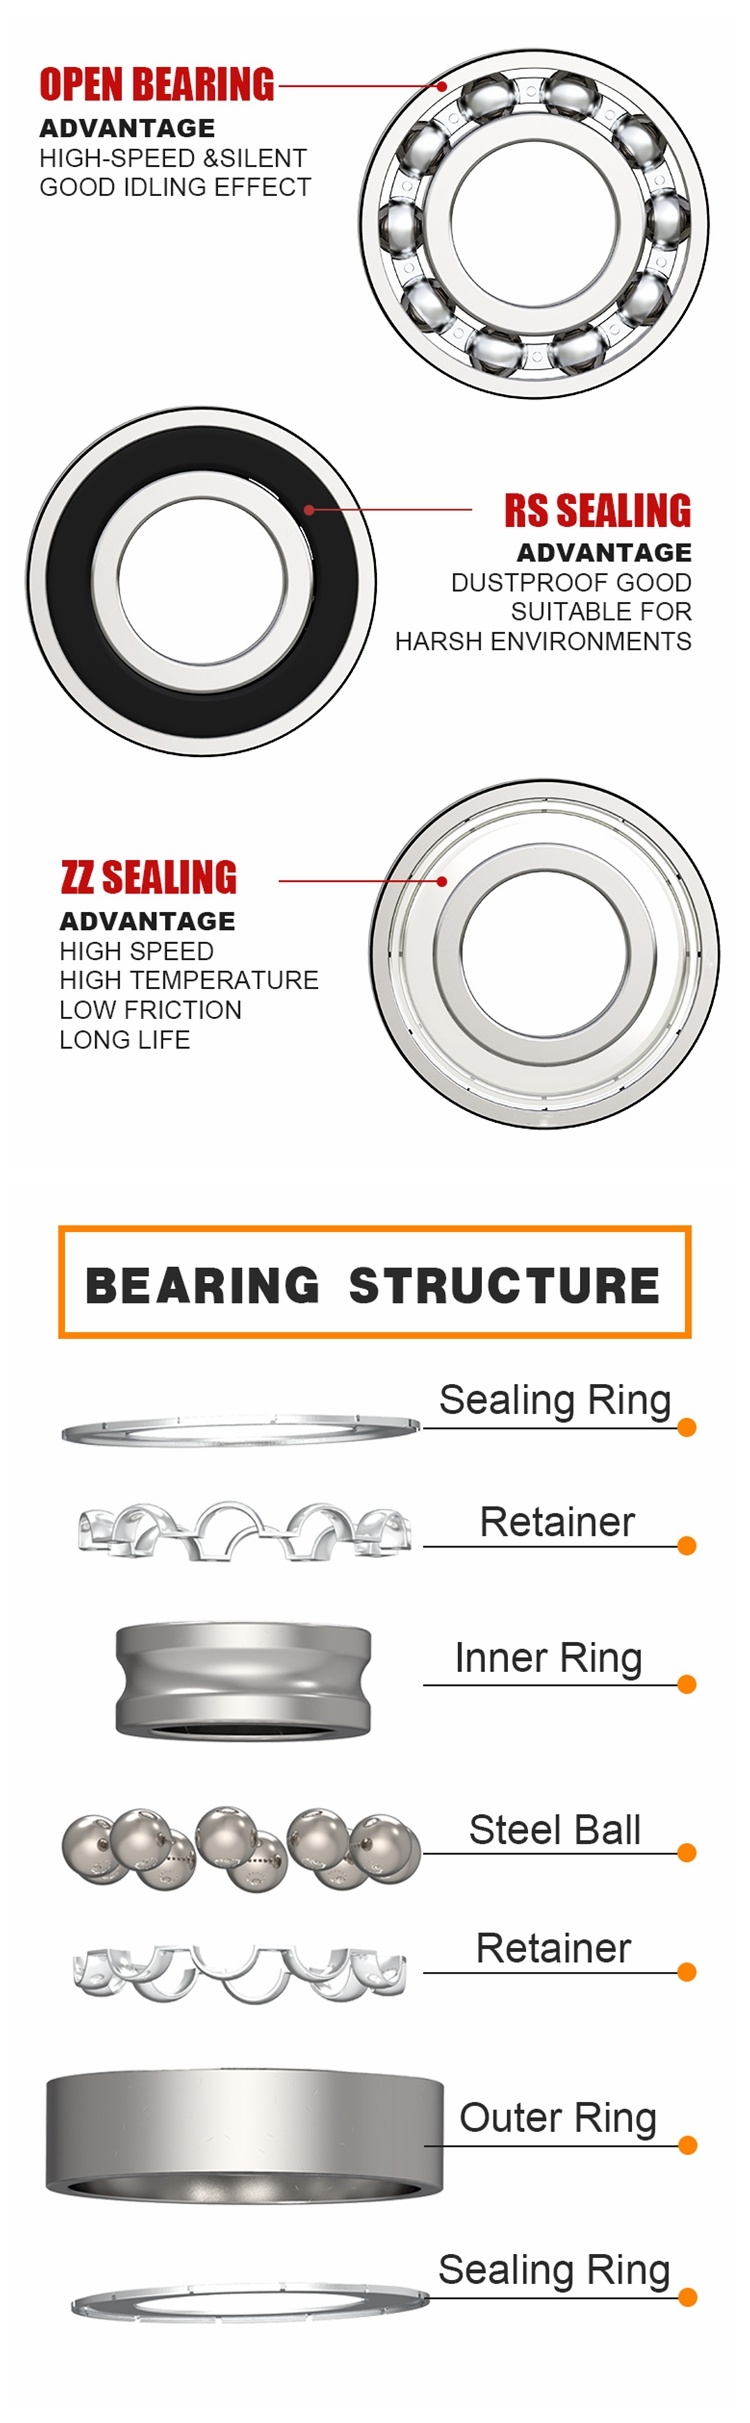 High Precision Bicycle Bearing Steel Cover 638 Zz Ball Bearings